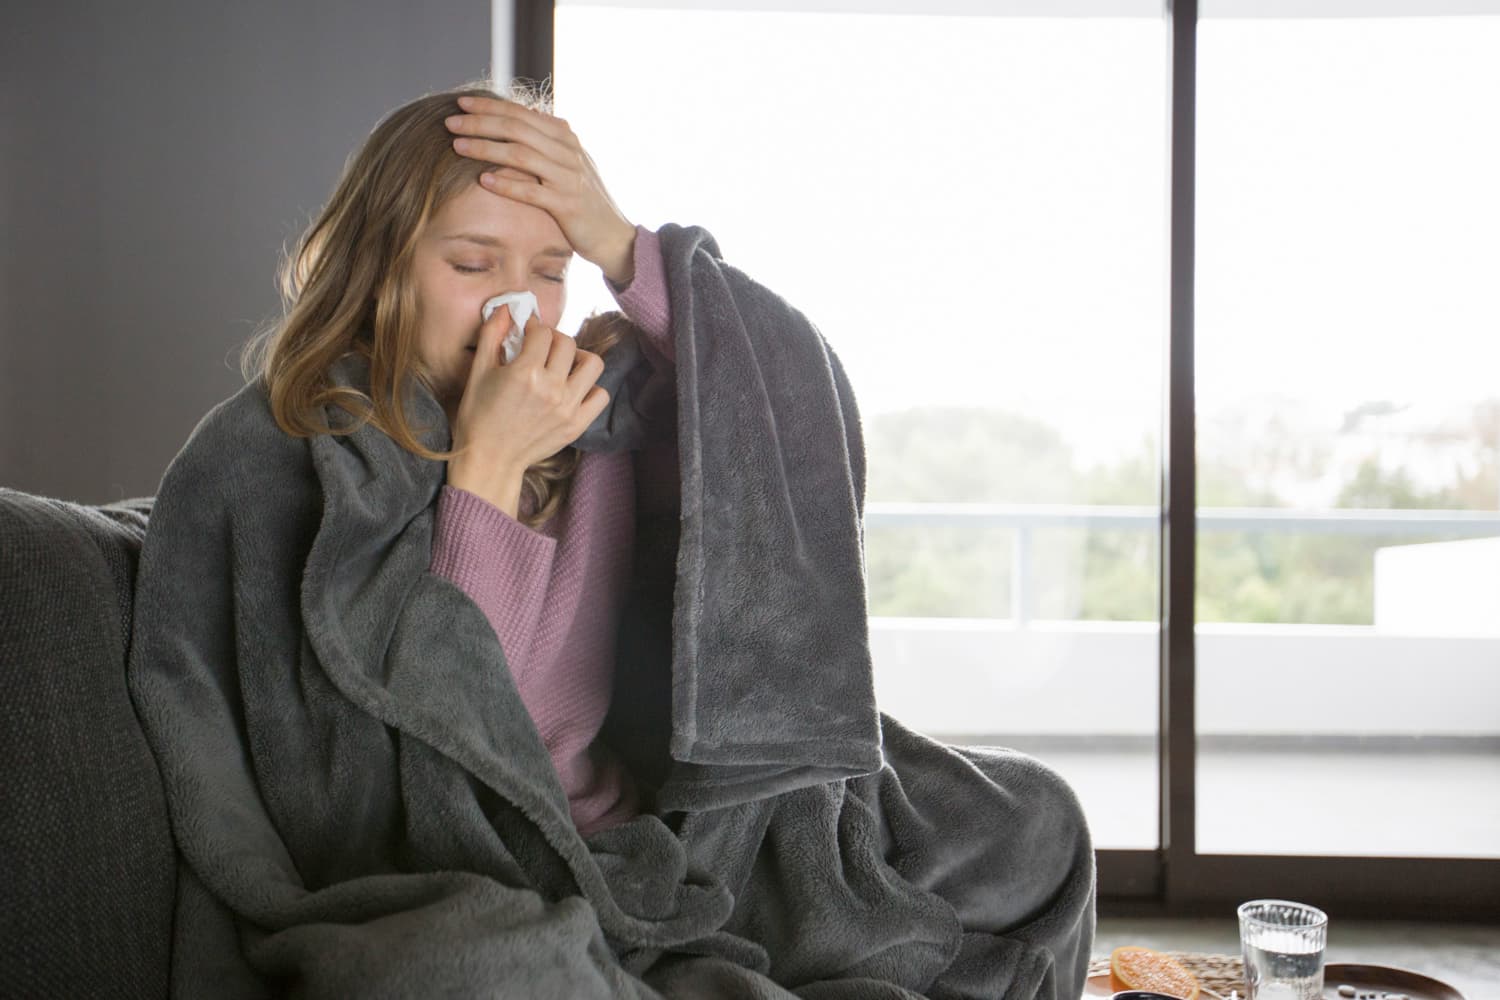 US doctors are on alert due to an increase in flu cases